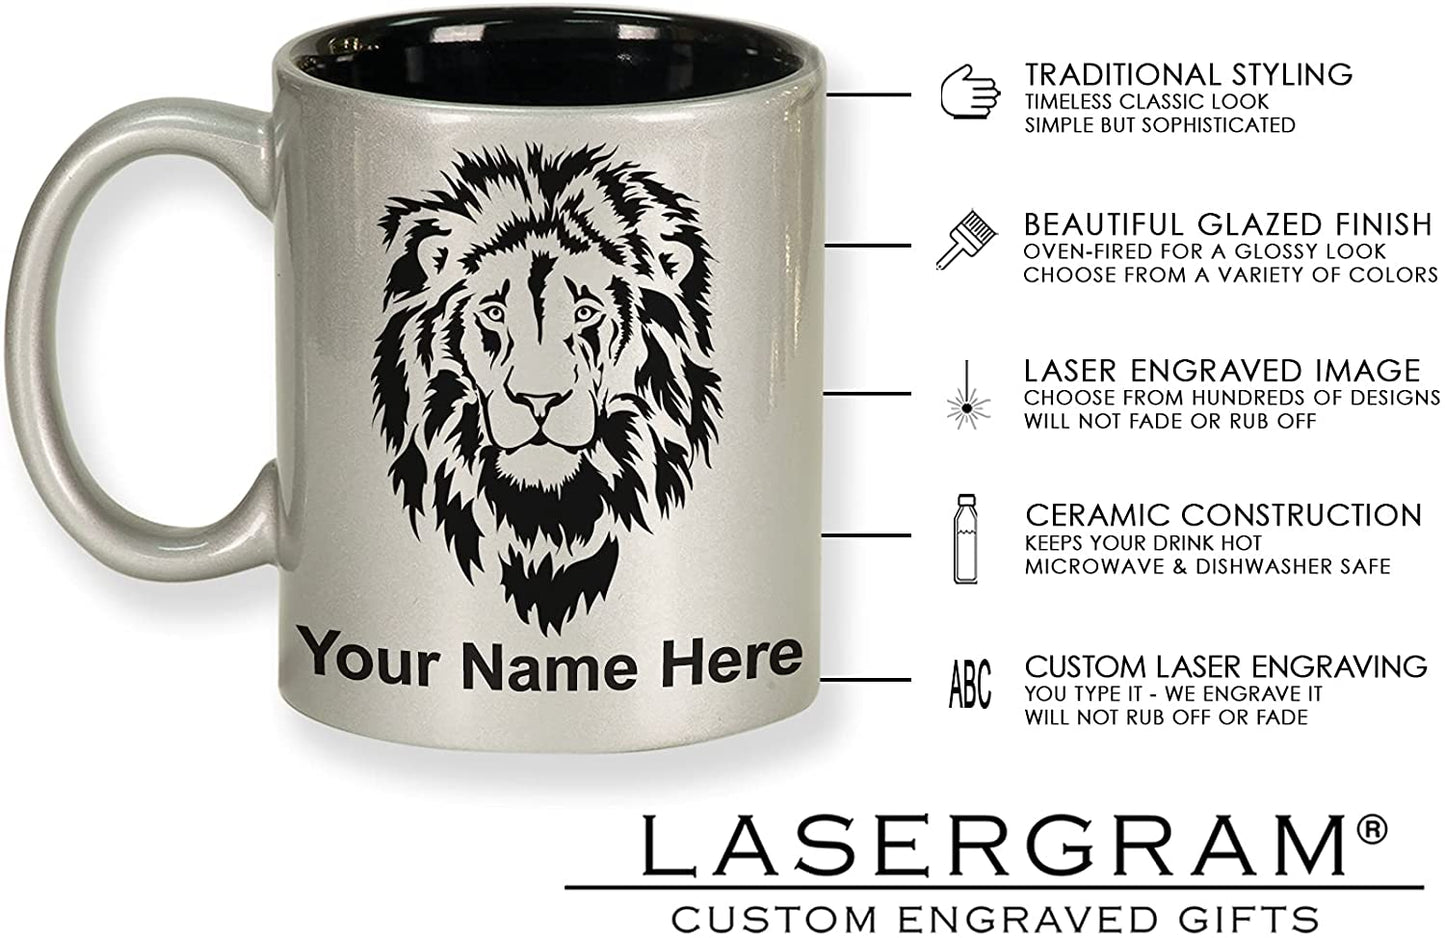 11oz Round Ceramic Coffee Mug, ST Surgical Technologist, Personalized Engraving Included